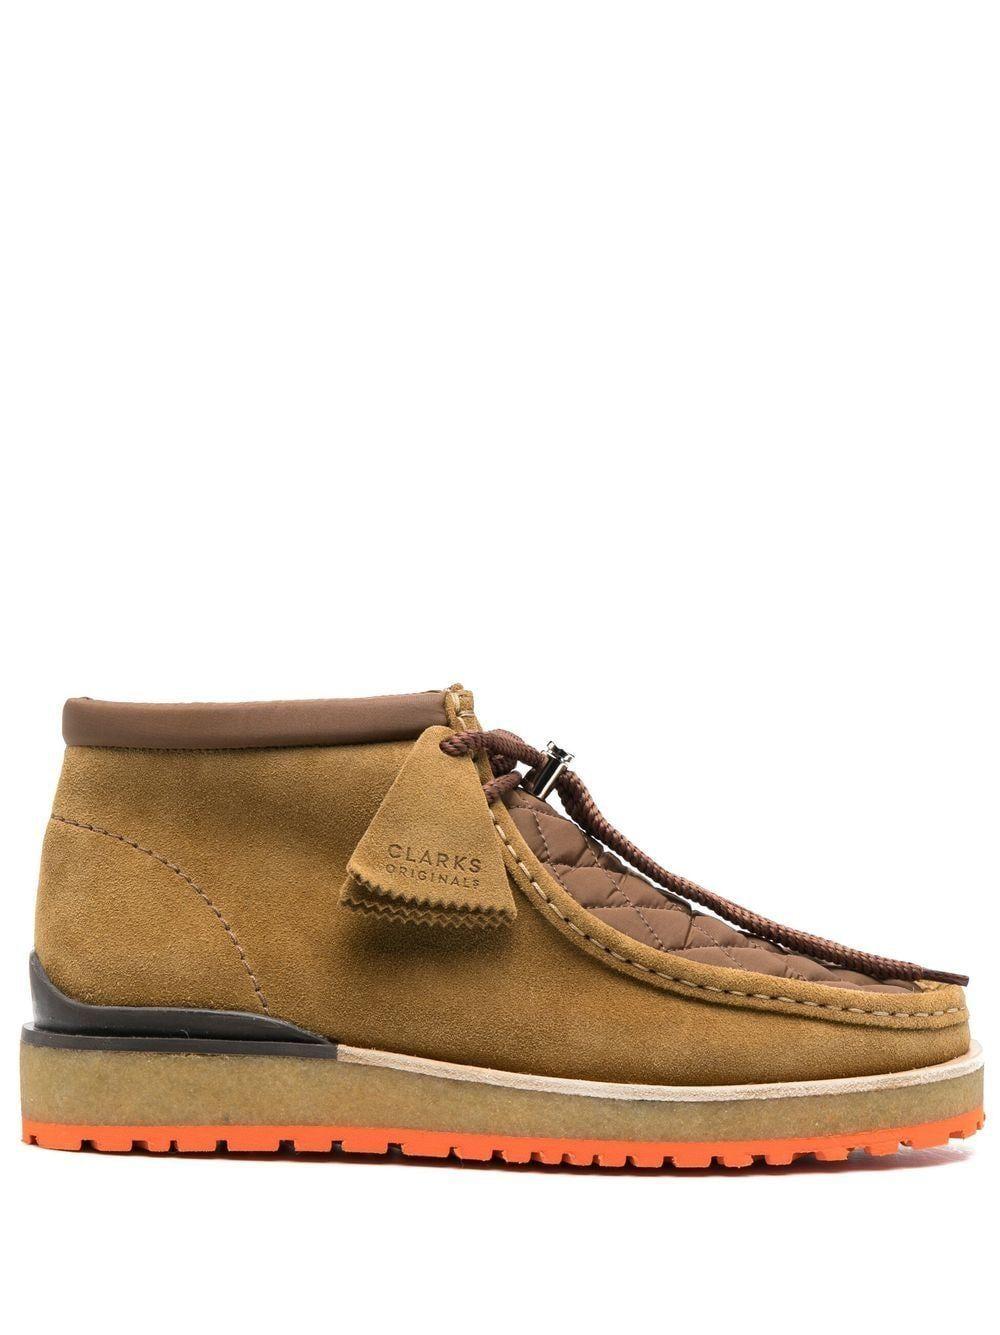 Moncler Genius Moncler Genuis X Clarks Wallabee Loafers in Brown for Men |  Lyst